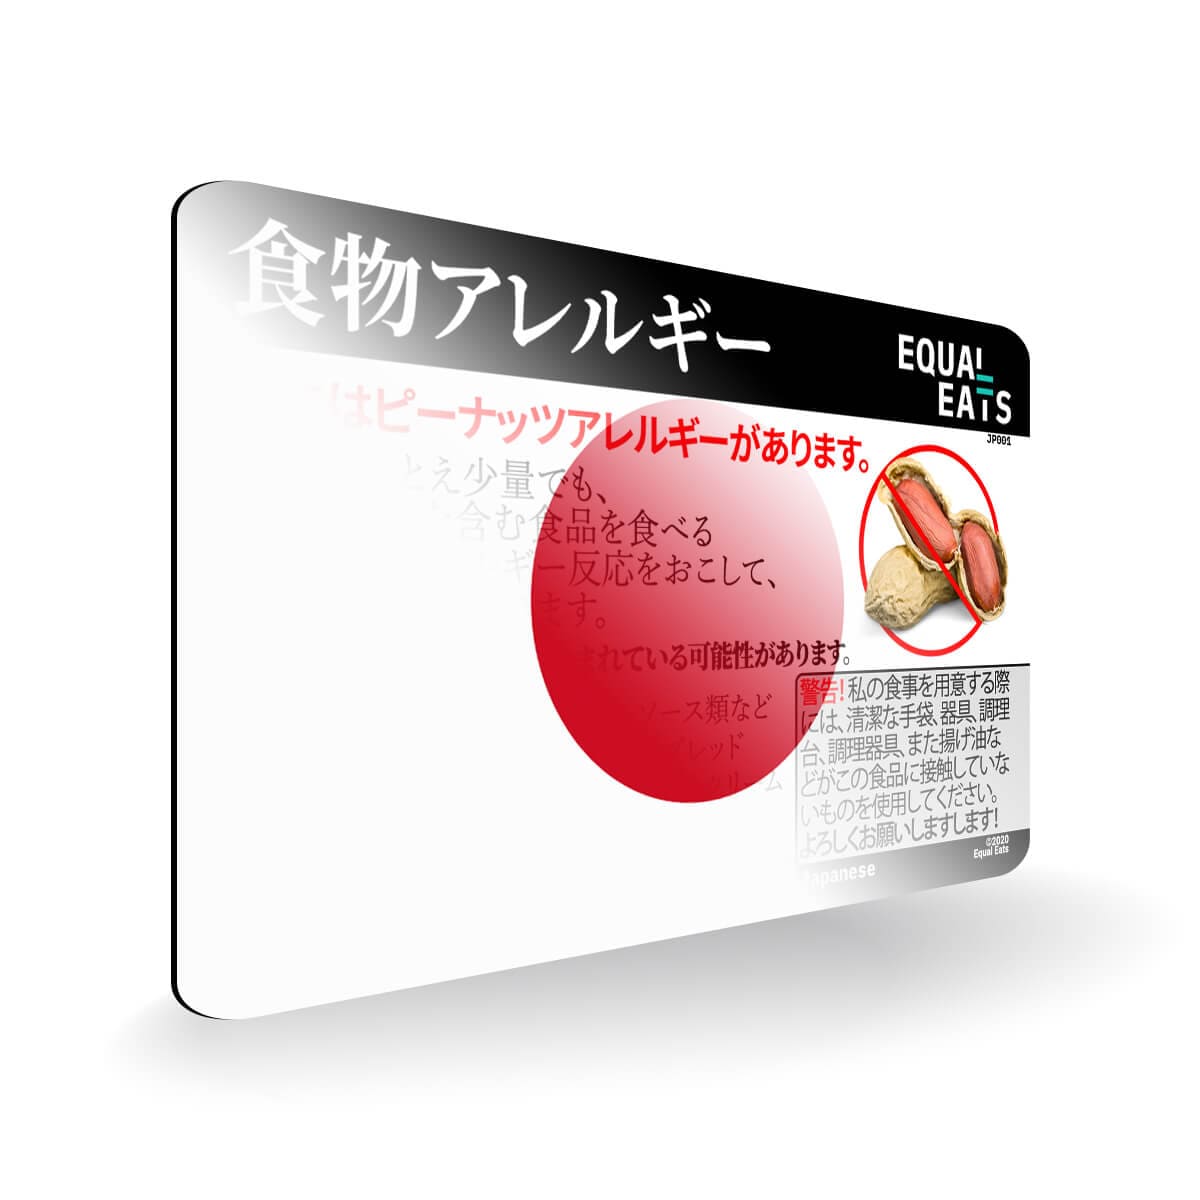 Peanut in Japanese, Peanut Allergy Card for Japan by Equal Eats